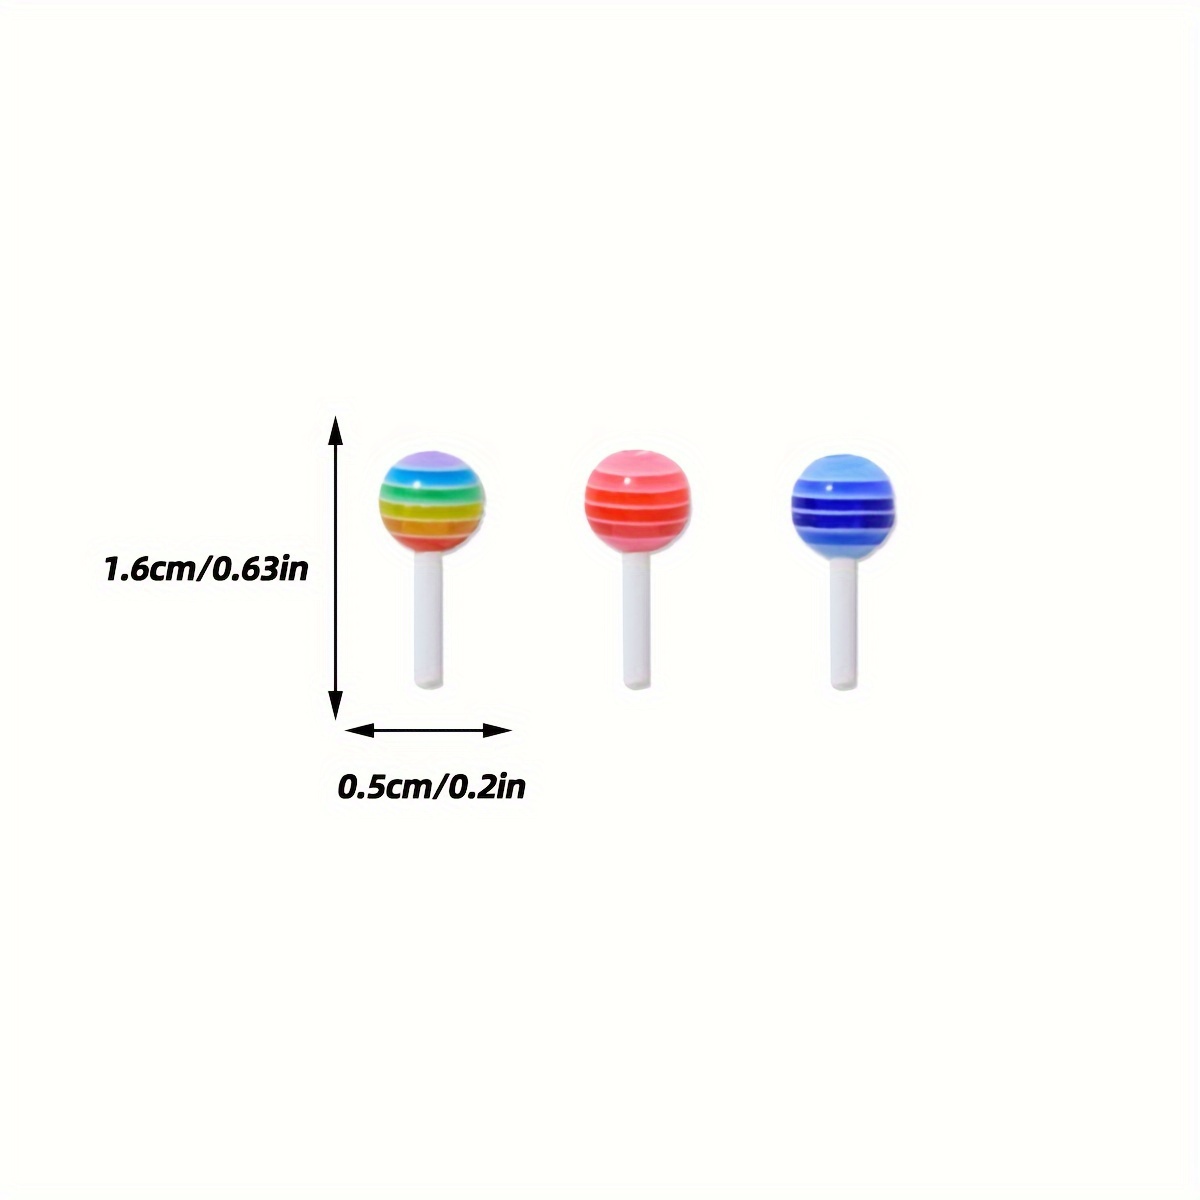 20 pcs Cute 3D Acrylic Lollipop Nail Charms - Colorful Manicure Accessories  for DIY Nail Art and Crafts